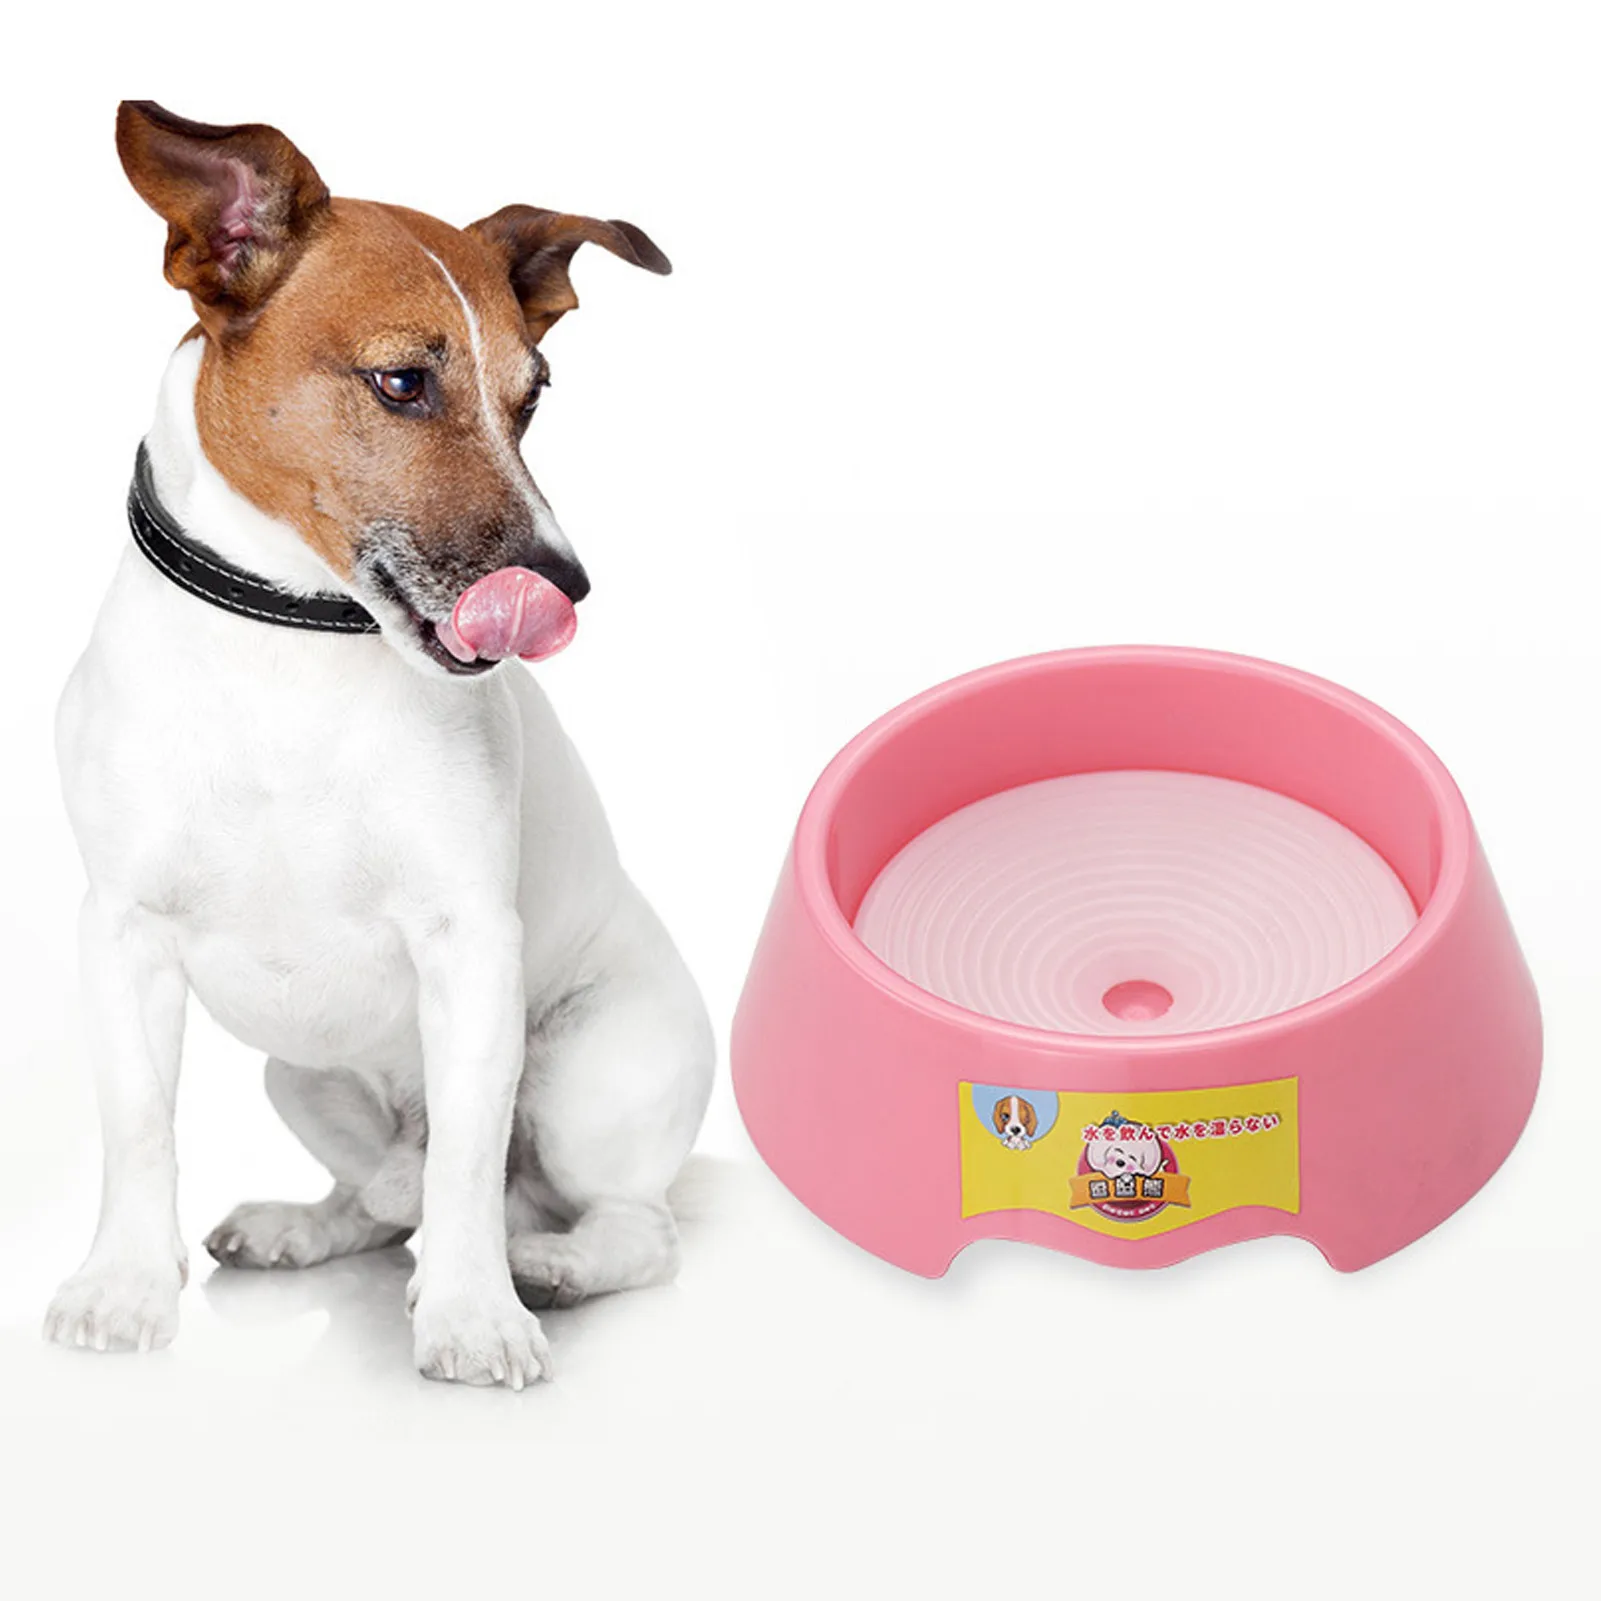 

Dog Bowl Foldable Eco Firendly Pet Cat Dog Food Water Feeder Portable Feeding Splash-proof floating Bowls Doggy Food Container